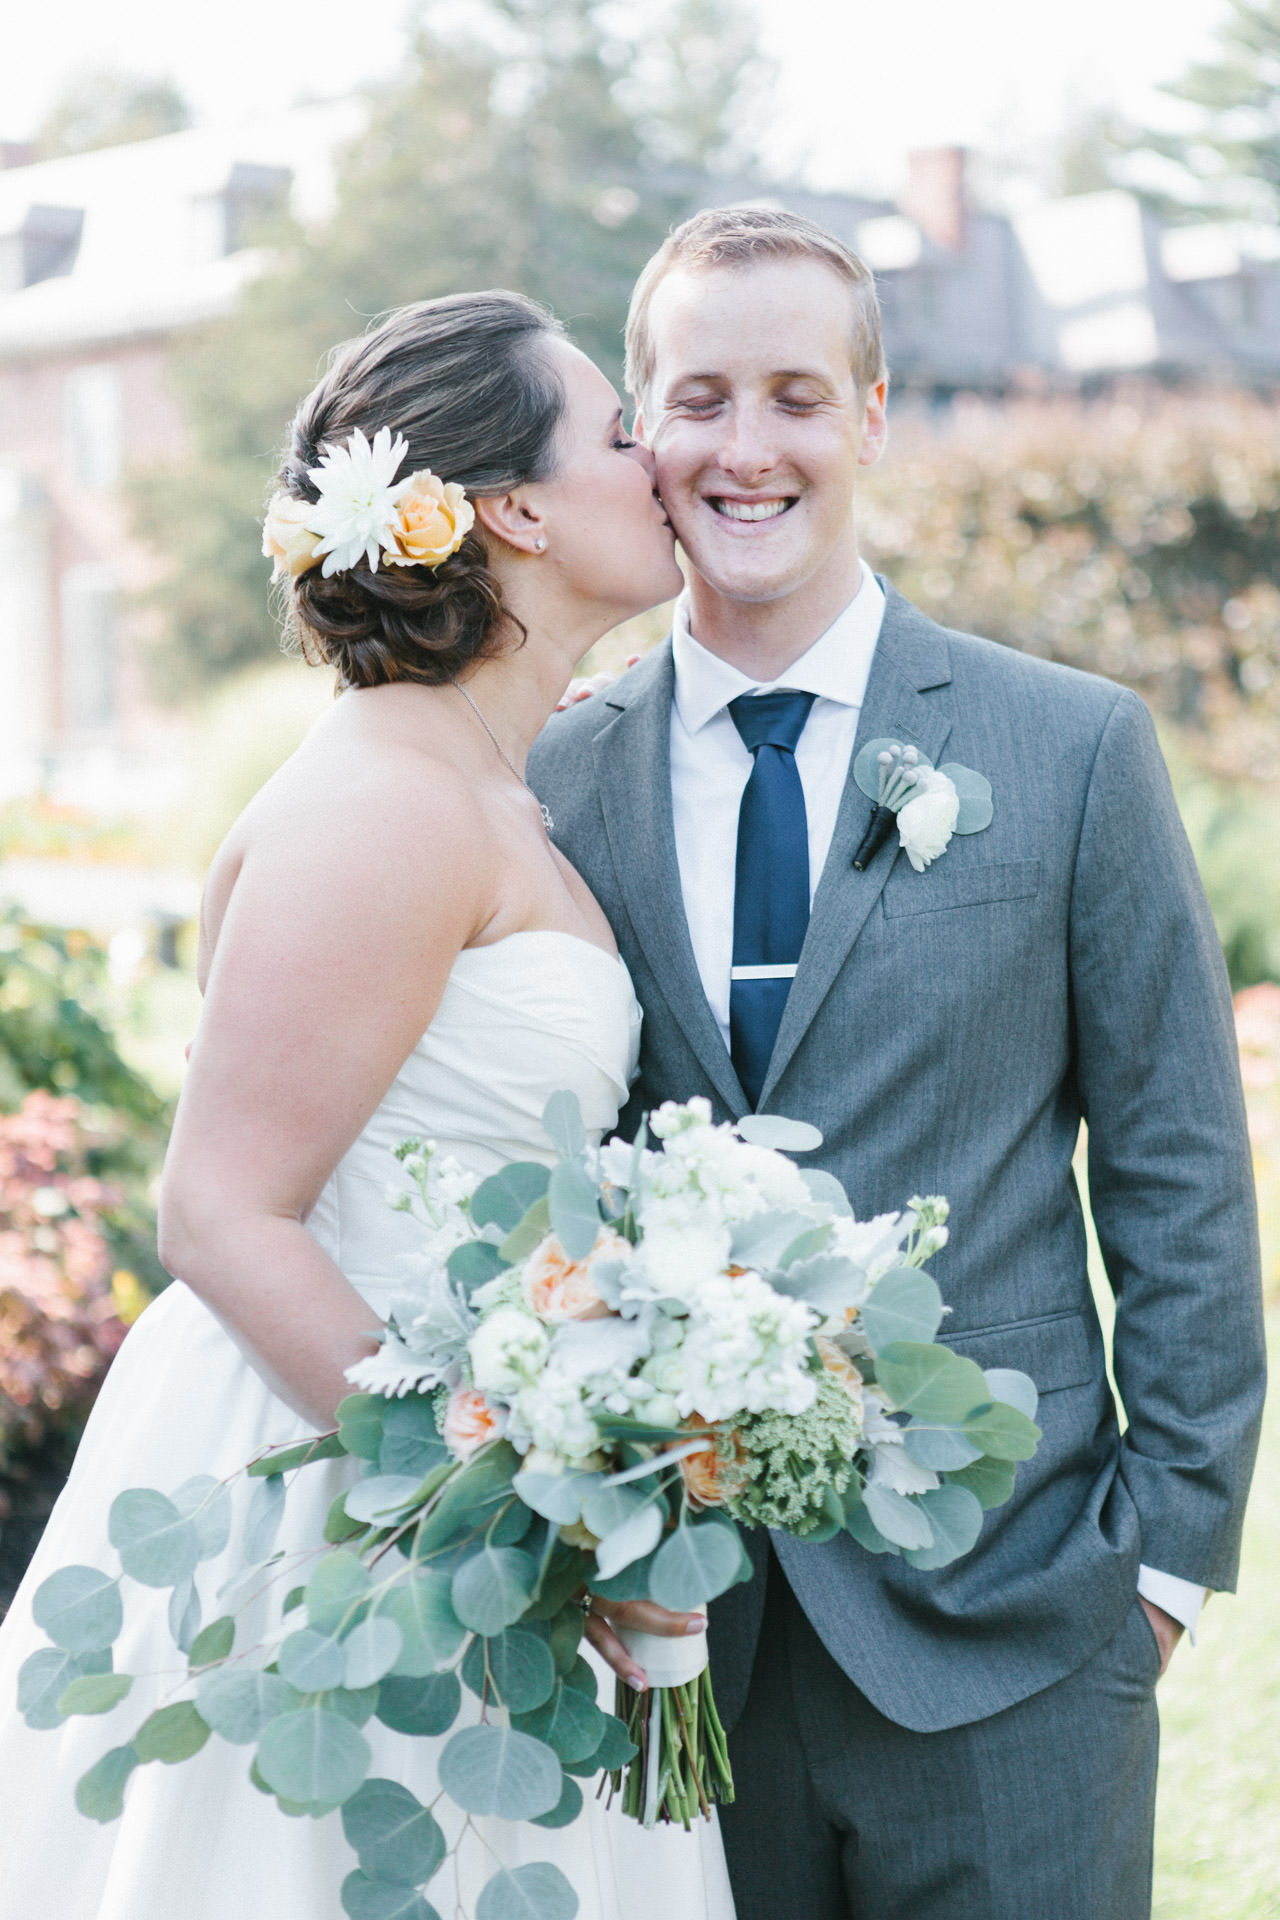 Bride kissing her new husband while holding a flower bouquet